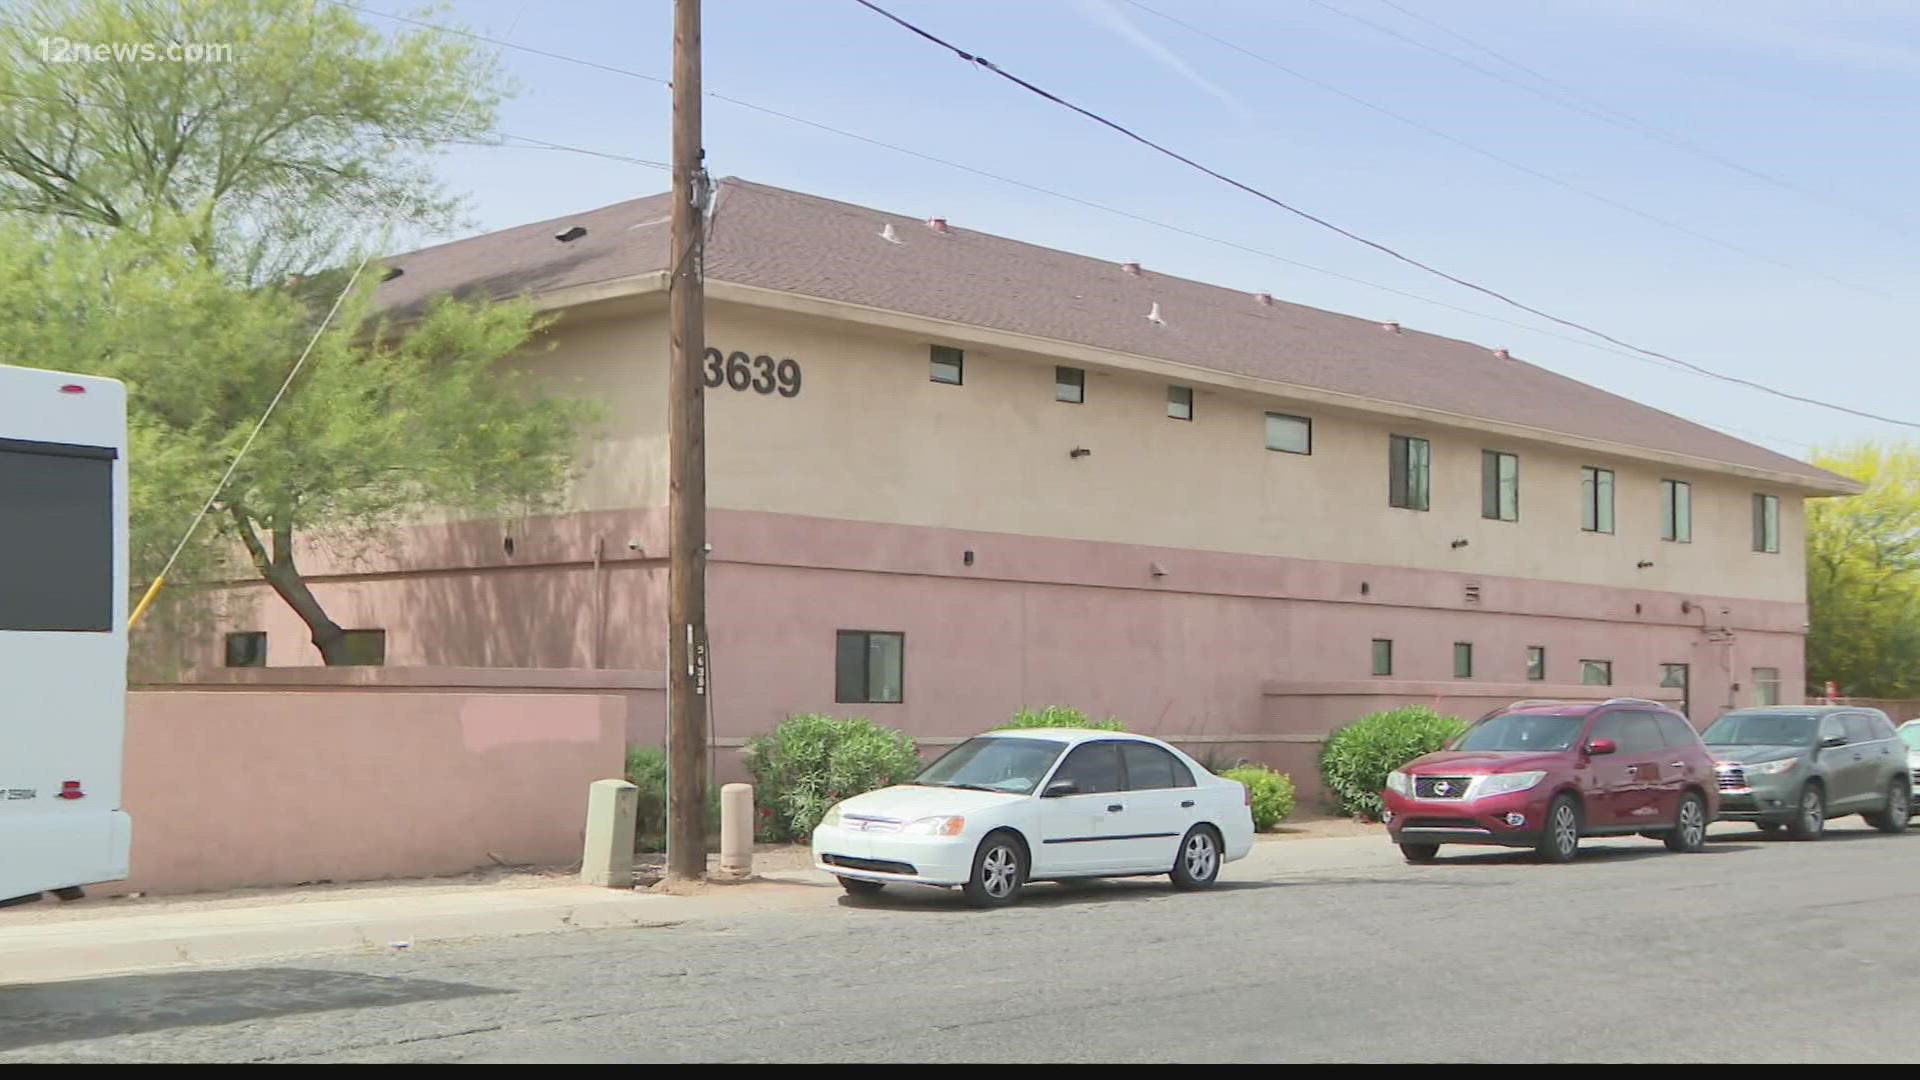 Chicanos Por La Causa, a new halfway house in the Valley, is helping addicts get back on their feet and into the workforce. The home will temporarily house 8 men.